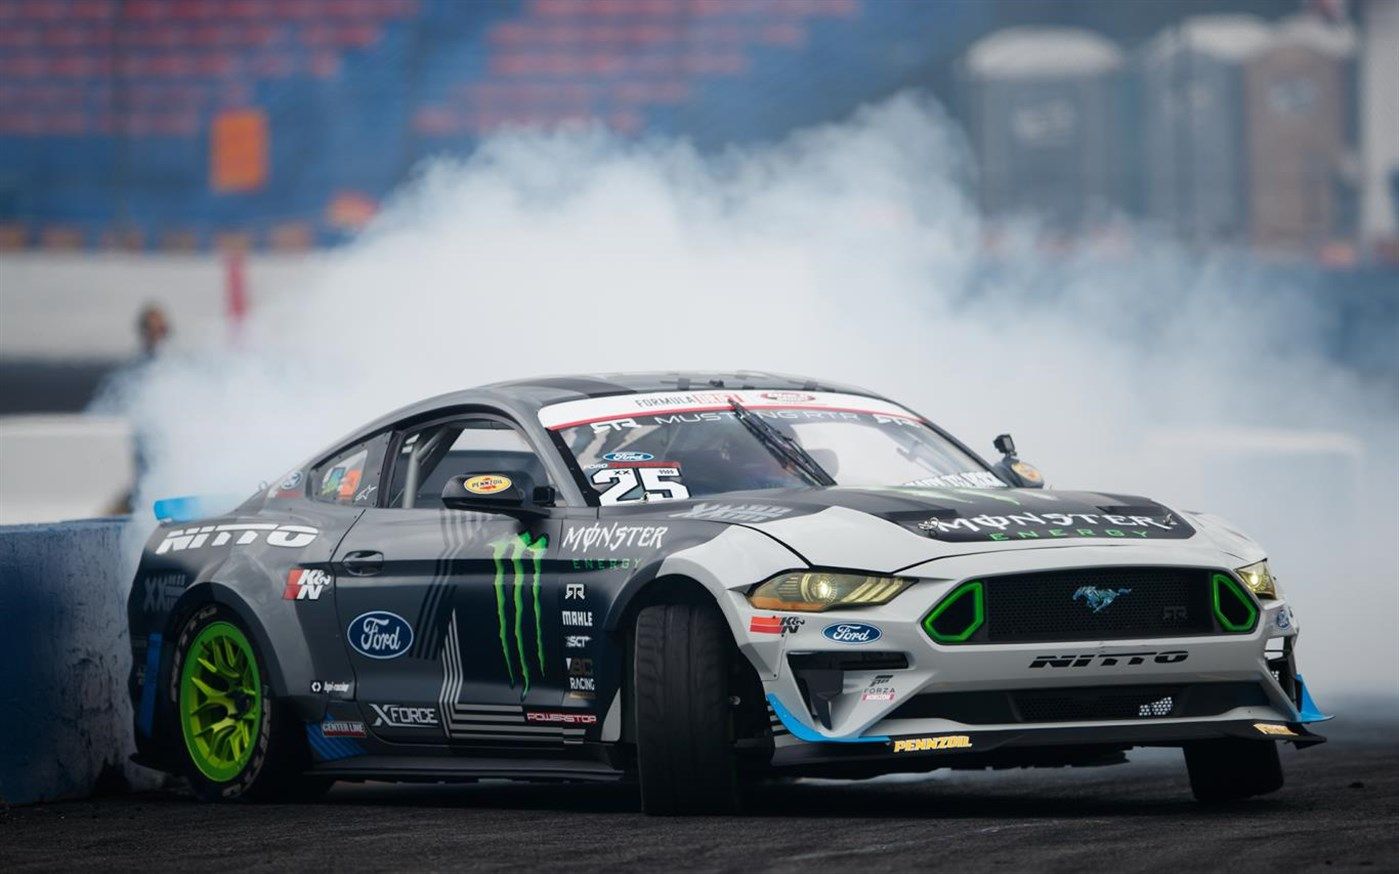 Windows 10 Users: Microsoft releases Ford Mustang RTR Formula Drift, a new theme pack for your PC